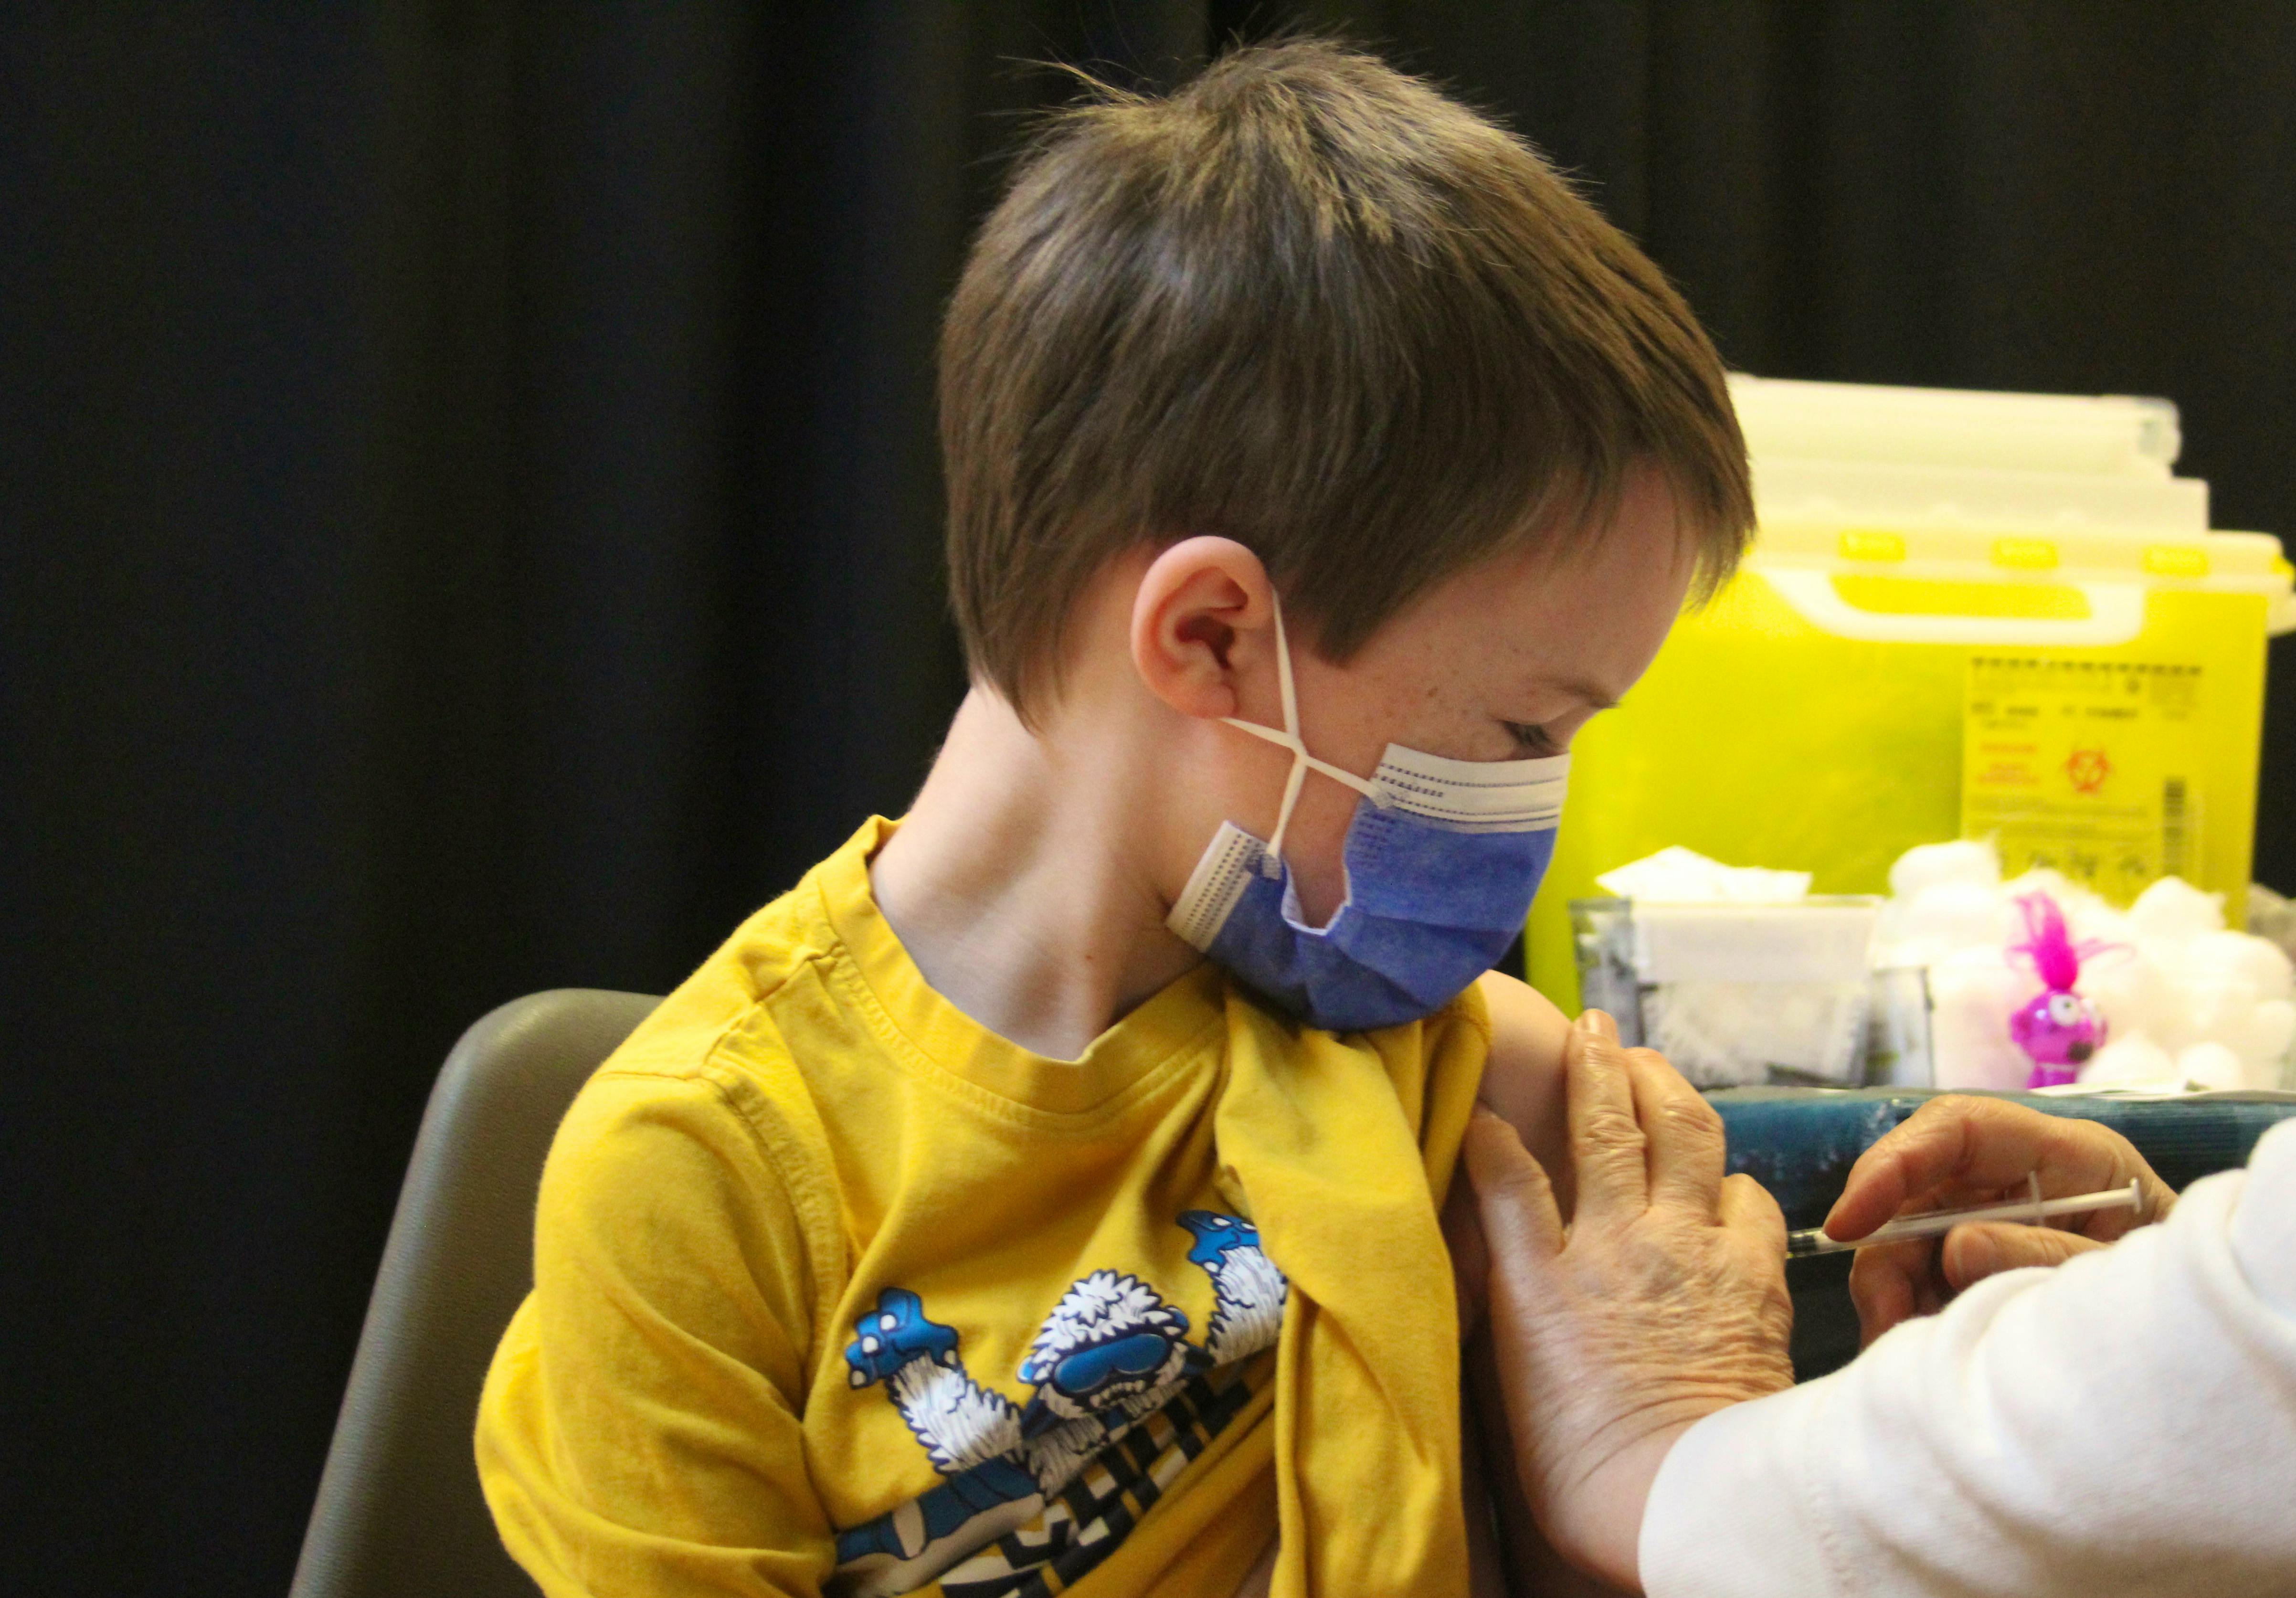 Hudson Holmes, 7, was one of the children who showed up to the vaccination clinic at the County Fair Mall for his first dose of the COVID-19 vaccine. Friday, Nov. 26, was the first day in P.E.I. that kids between the ages of five and 11 were eligible to be vaccinated. Hudson's mother, Becky Holmes, said she was "a little unsure, but I think this is the right direction to go at this point." Her son, she said, was relieved to finally get his vaccination.